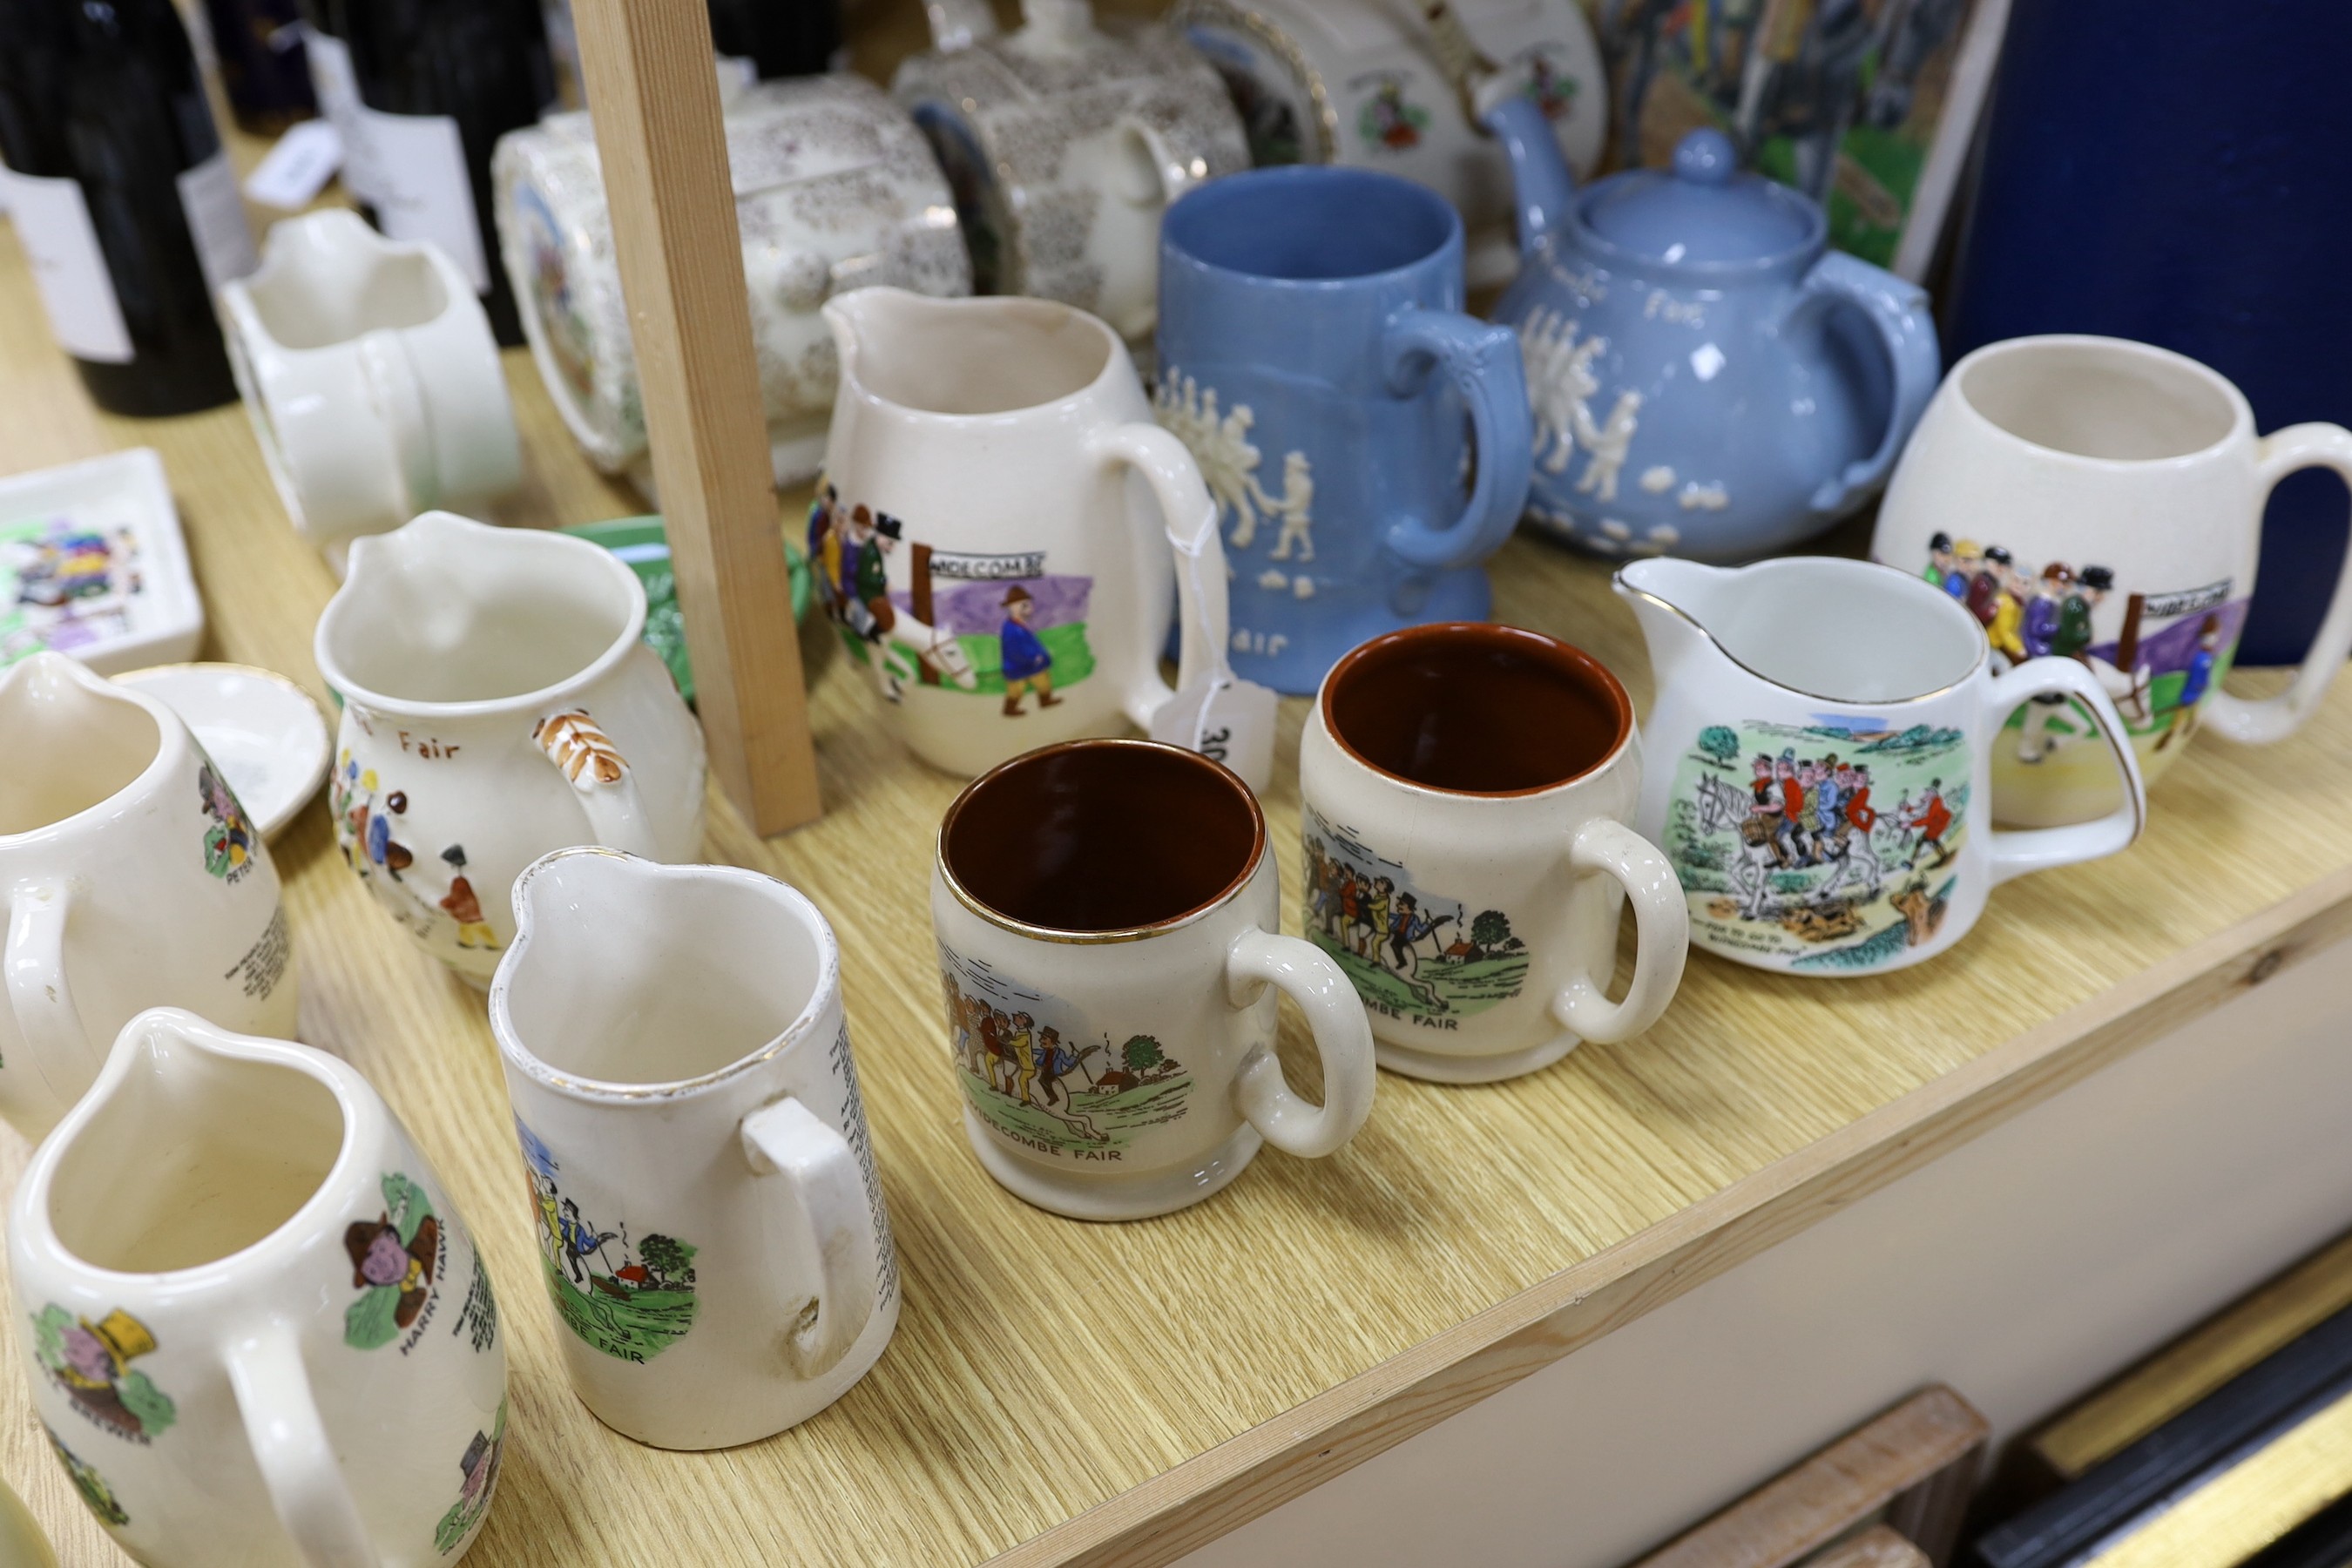 A quantity of novelty items relating to Widecombe Fair, to include jugs, teapots etc. - Image 3 of 4